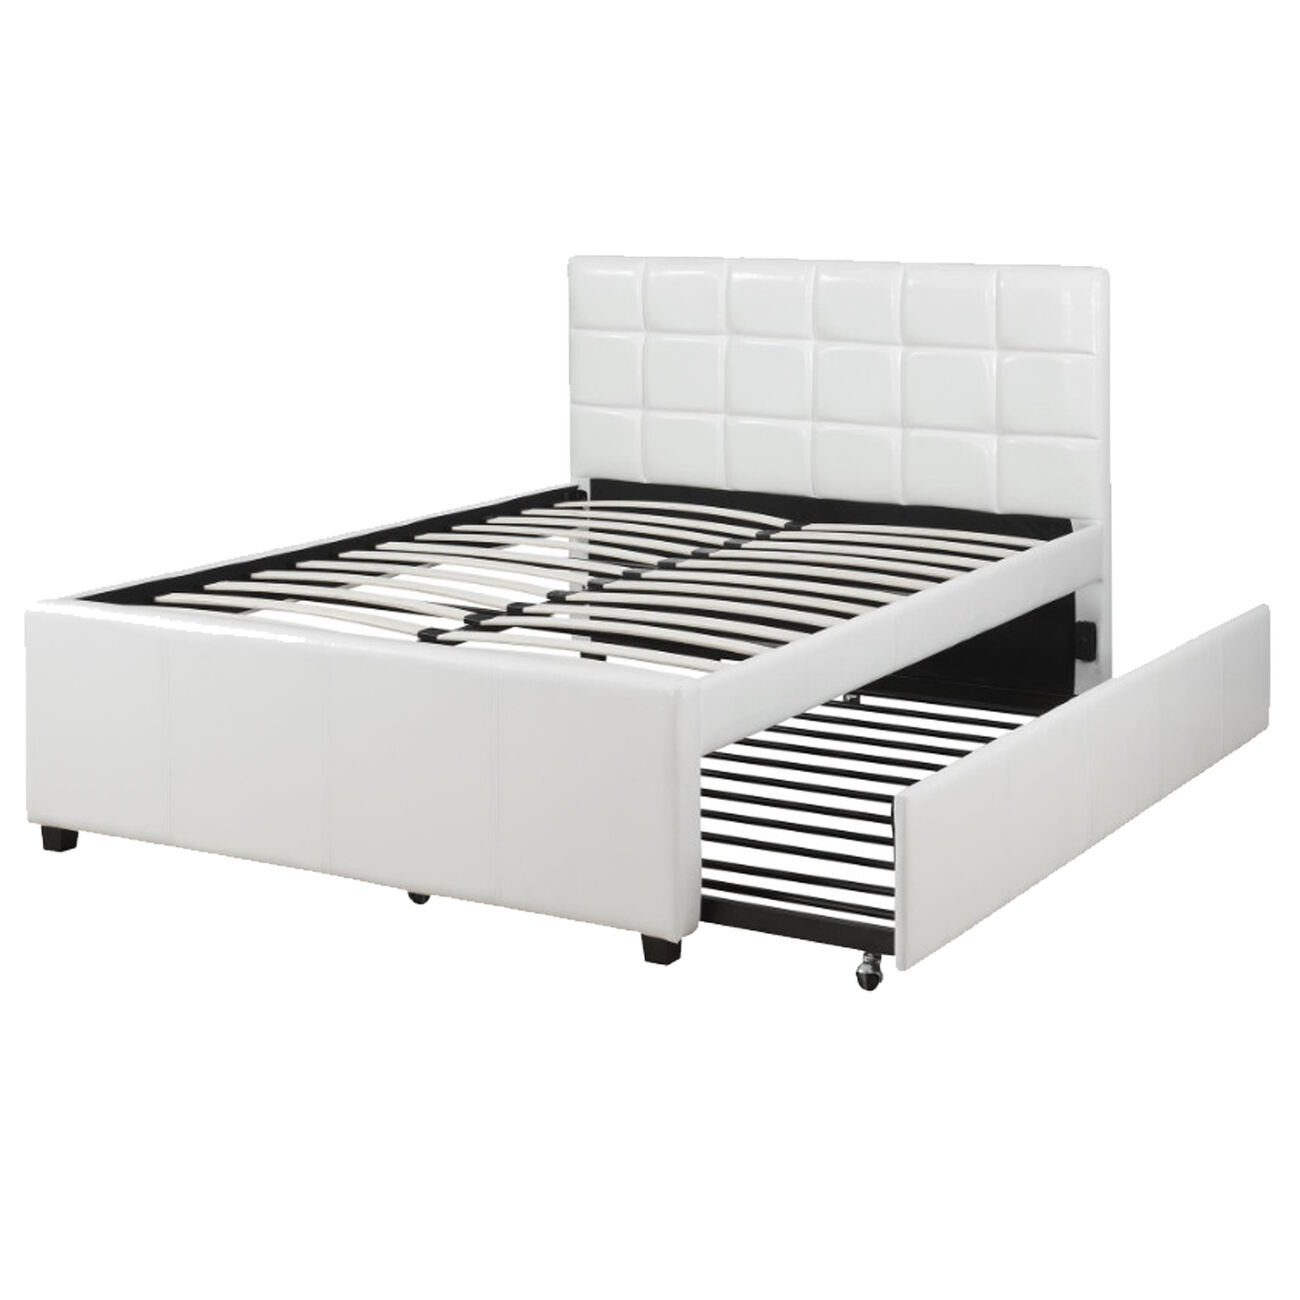 Wooden Full Bed With Trundle And SQU Tufted HB, White